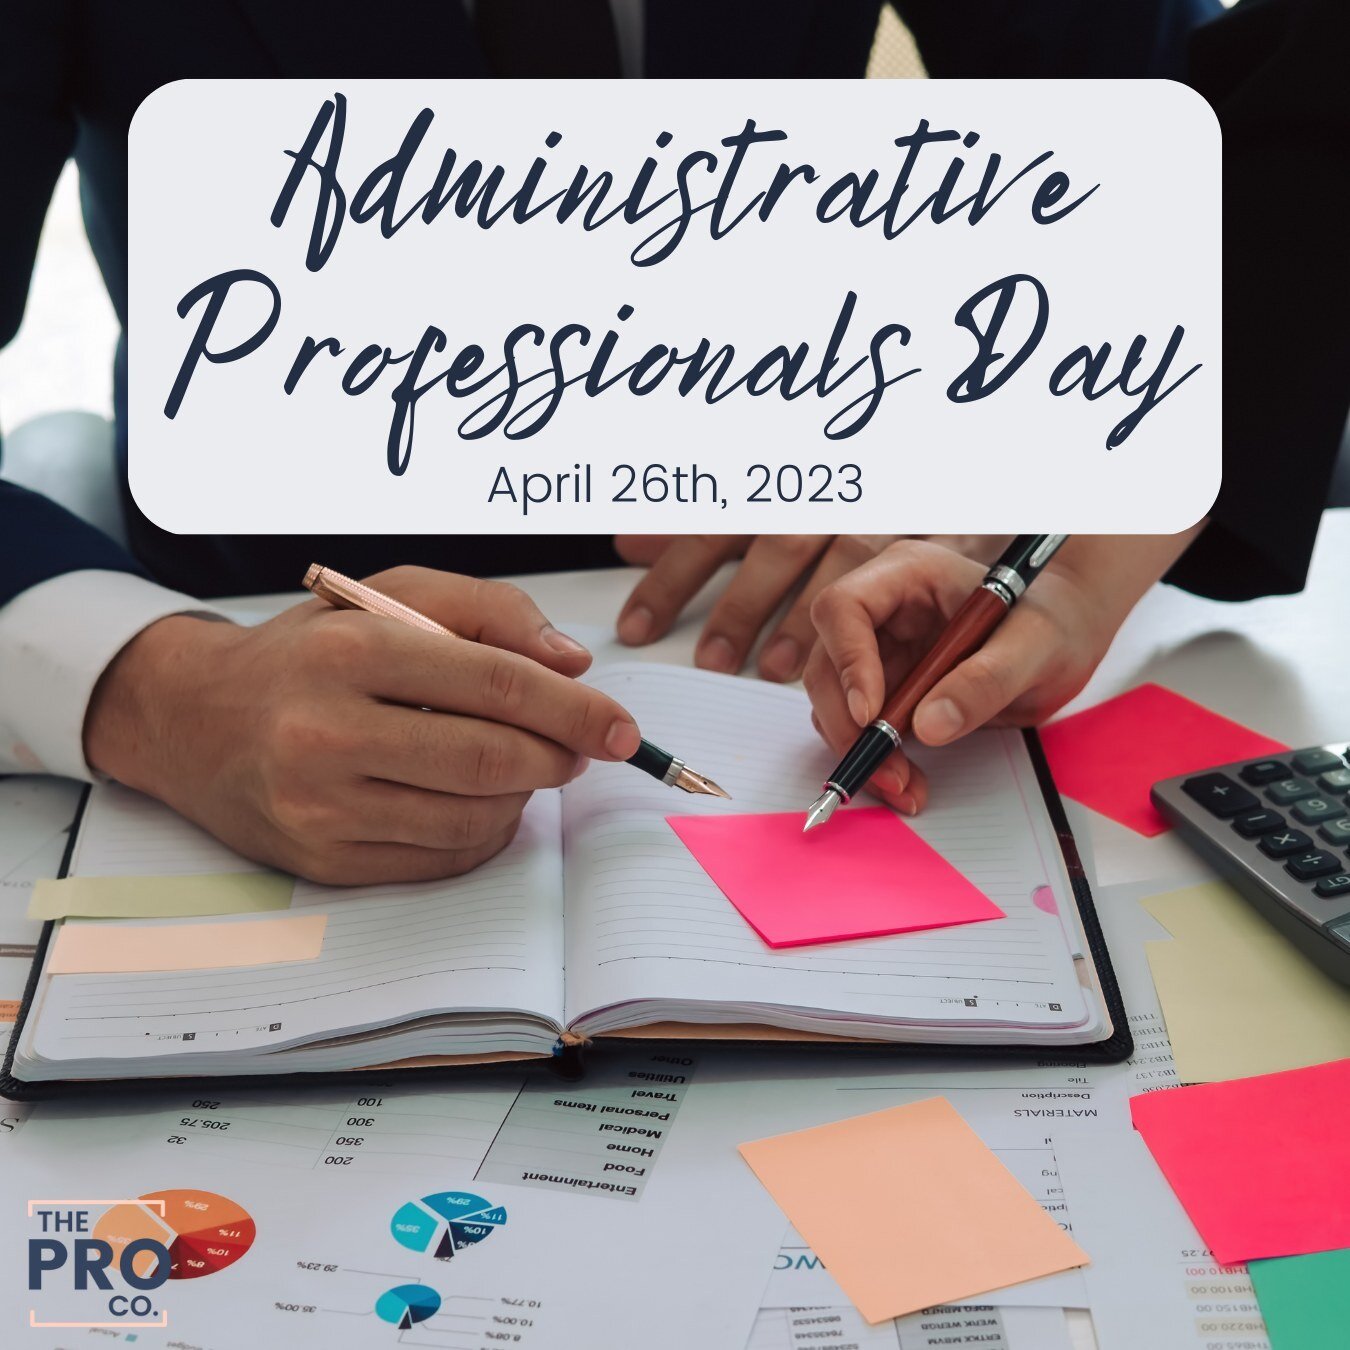 It's April 26th, which means... it's Administrative Professionals Day (aka our day)! 😄

A virtual assistant can handle everything from filing, office and digital organization, marketing, calendar and inbox management , project management, bookkeepin